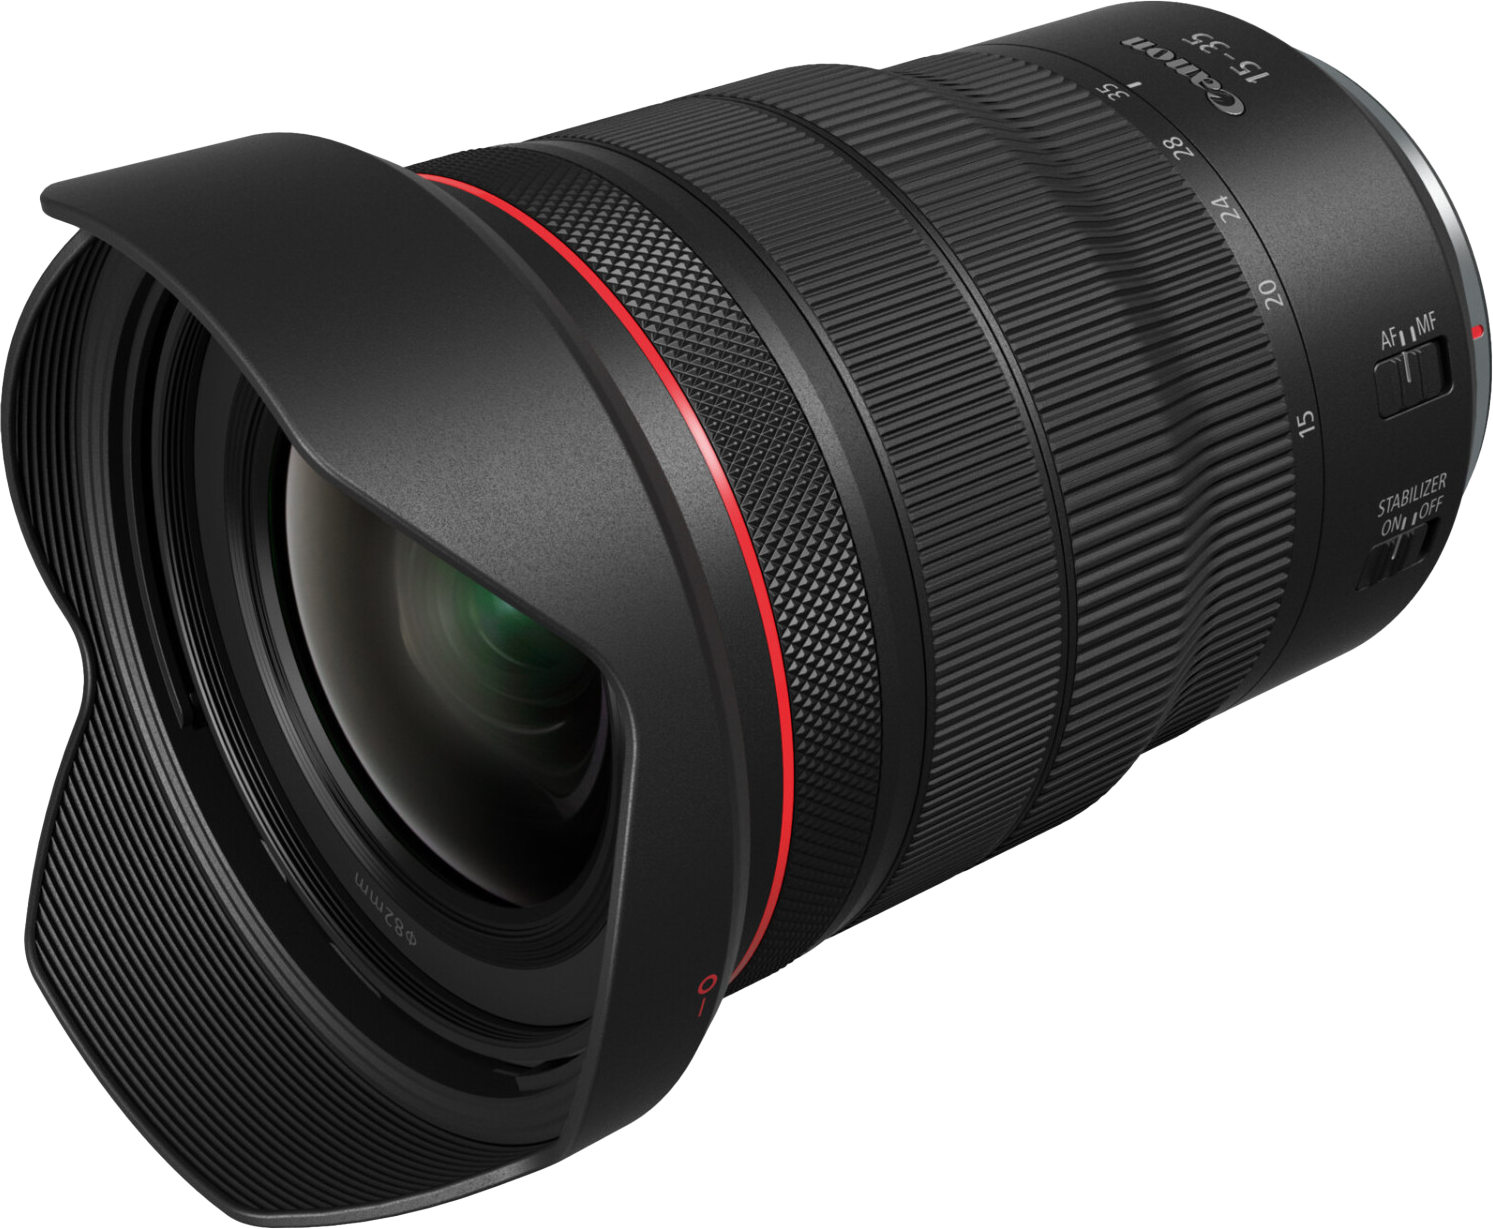 A Canon RF15-35mm f/2.8 L IS USM lens